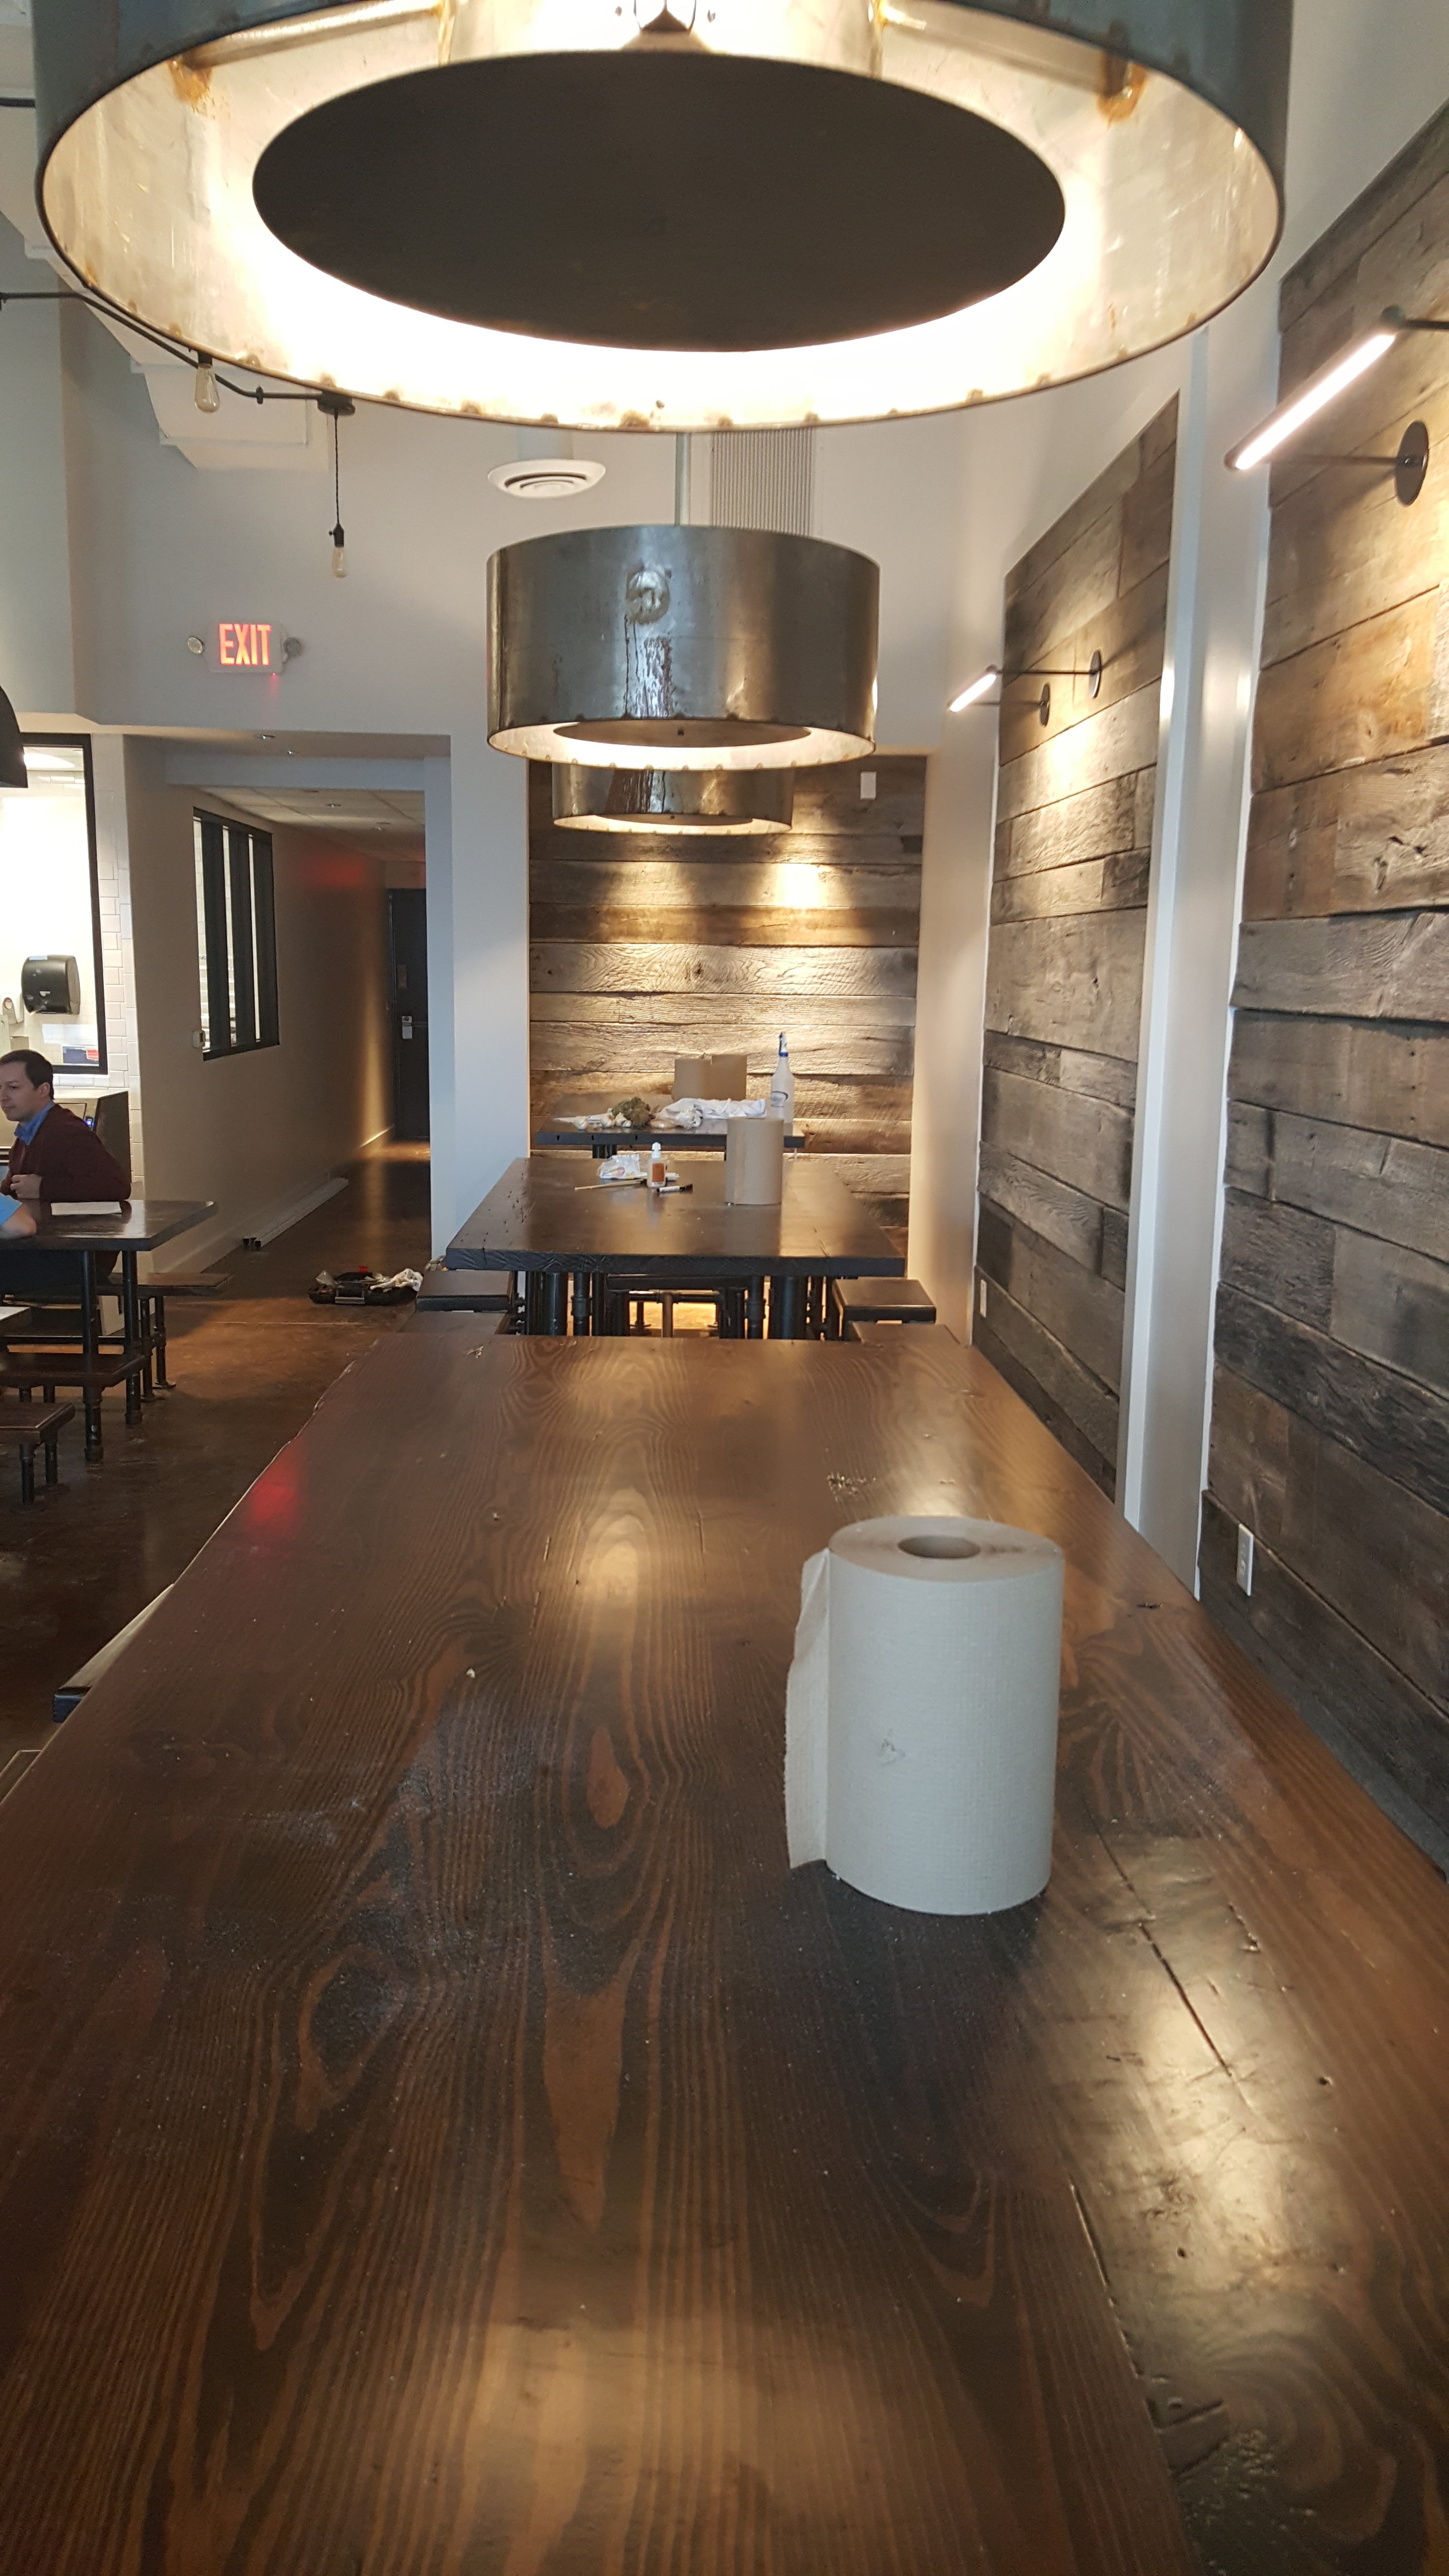  Finding a way to create a more personal space in a public location can be a challenge.&nbsp; This was solved by creating a set of bar-height tables, with large hanging light fixtures that help establish and contain a space within the open floor plan